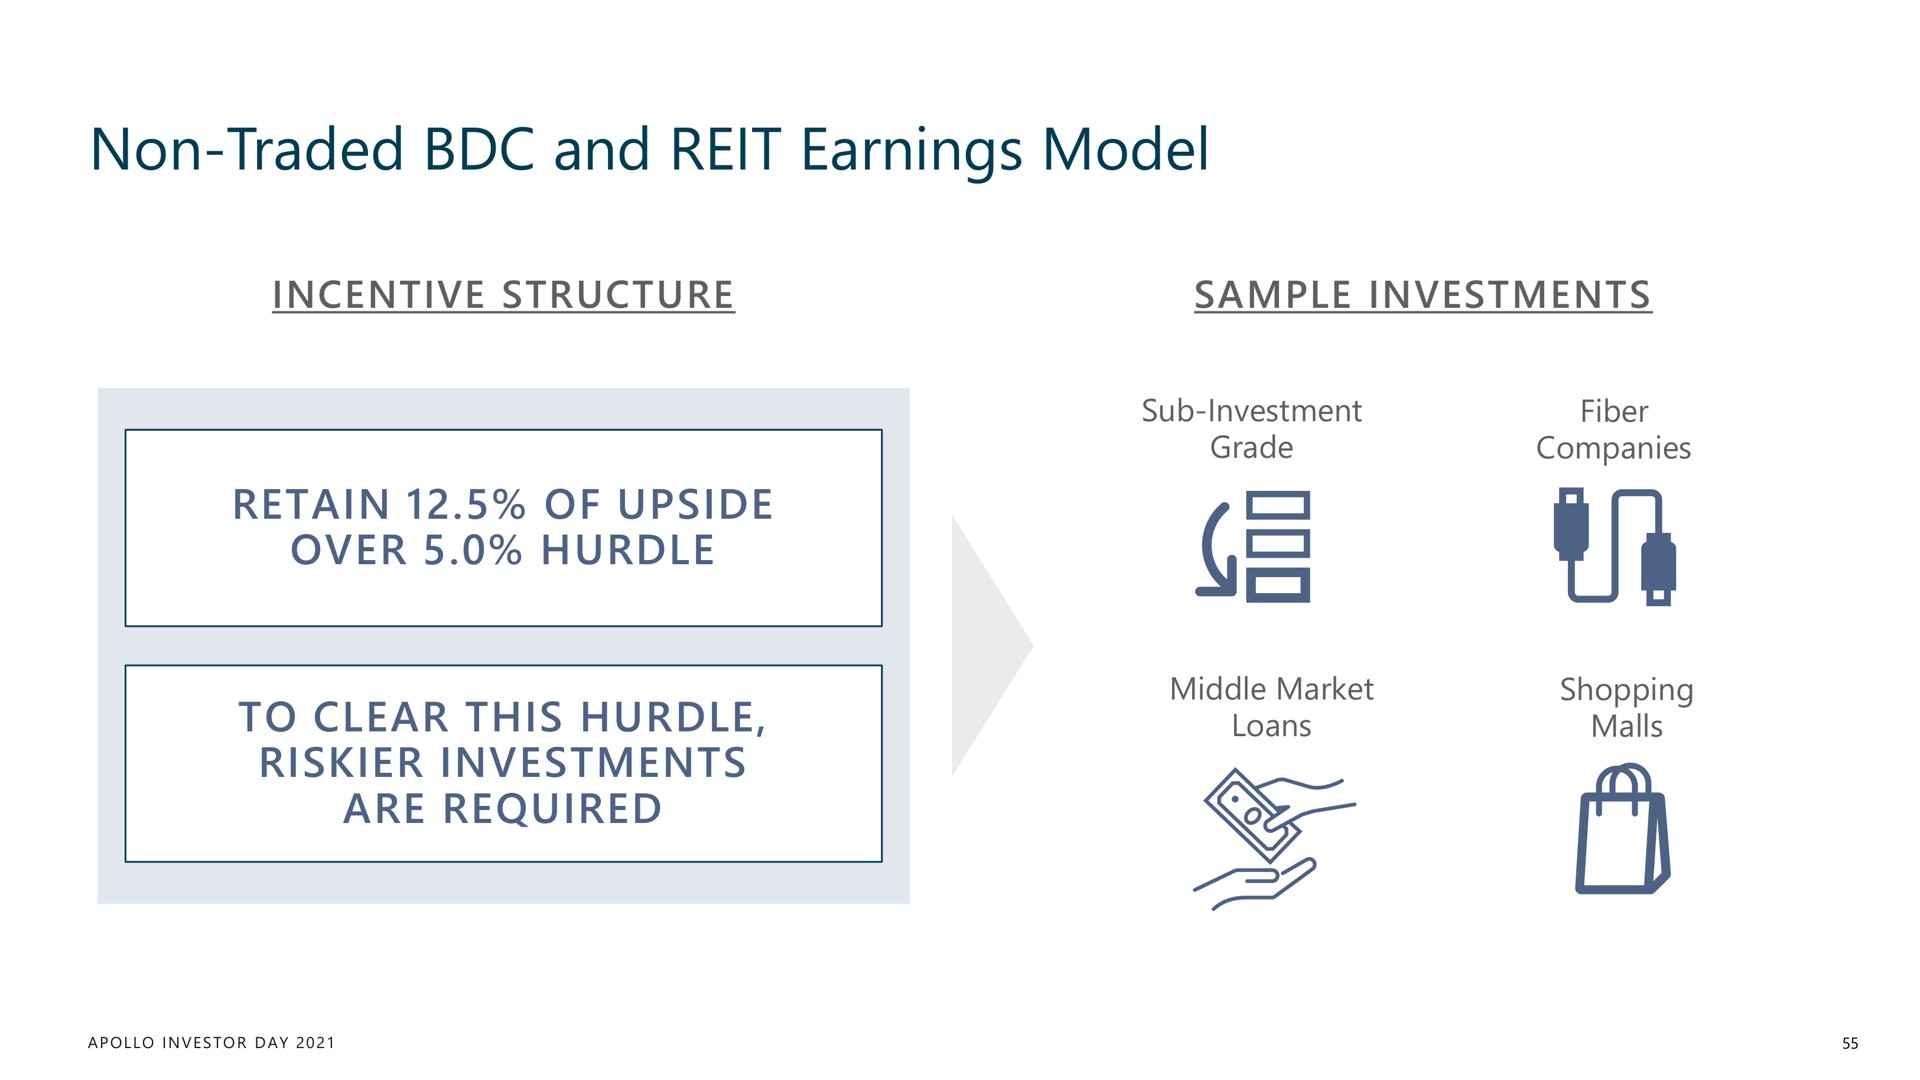 non traded and reit earnings model | Apollo Global Management